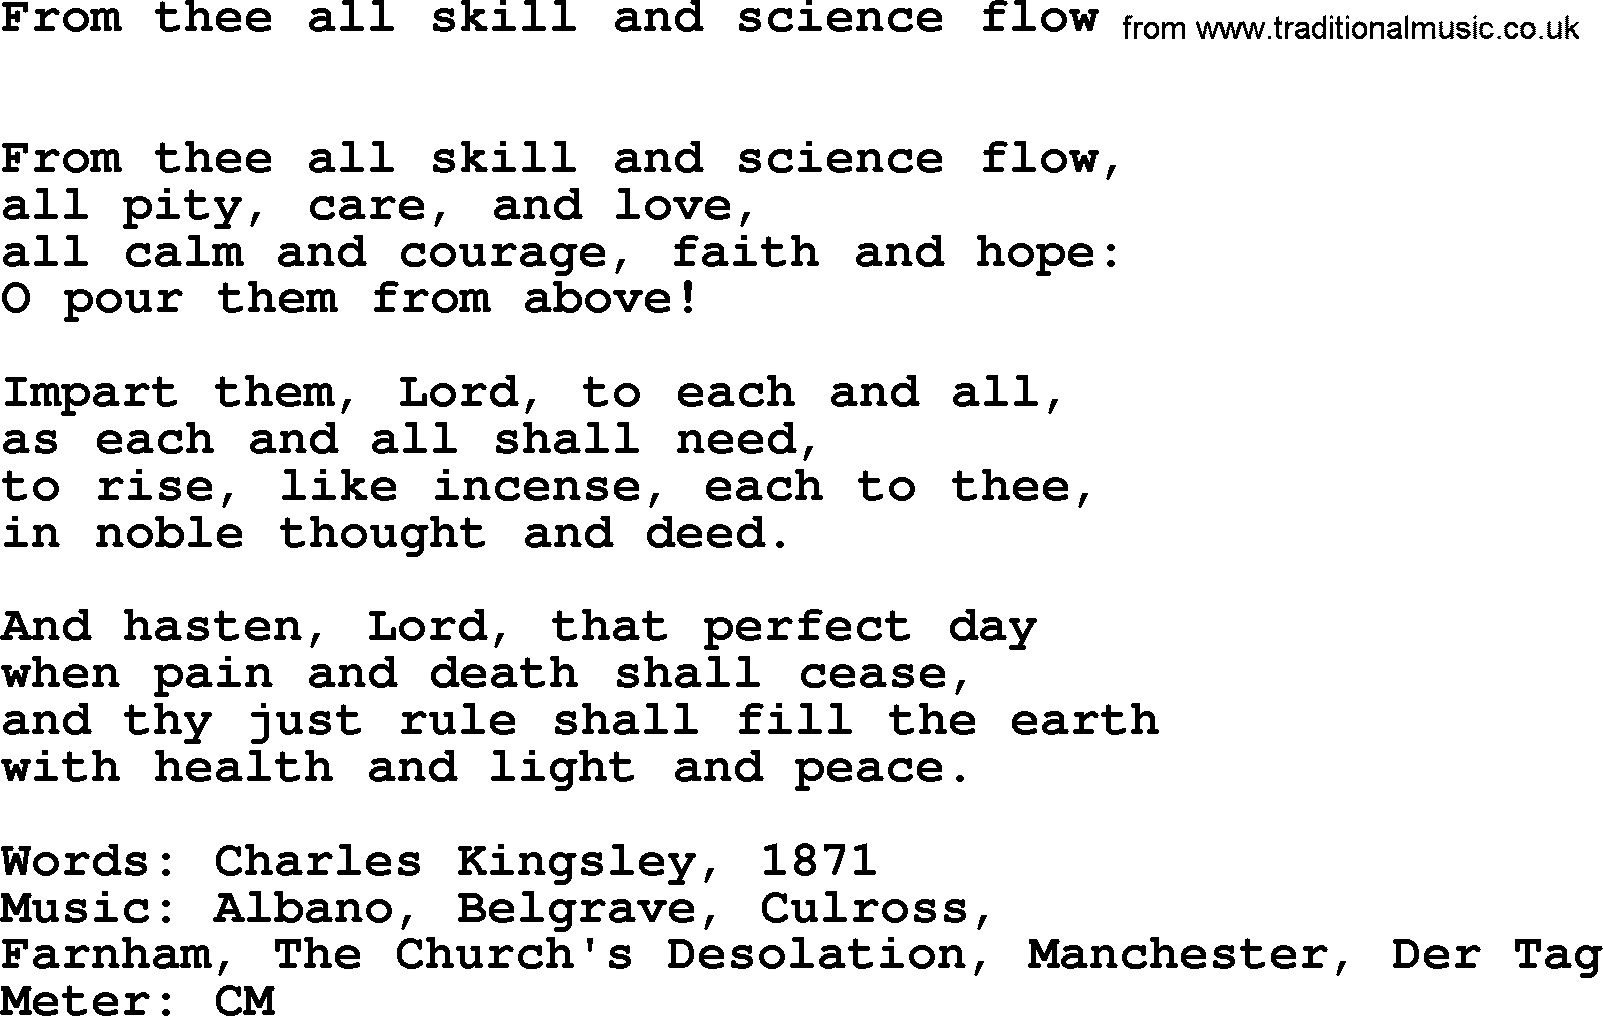 Hymns Ancient and Modern Hymn: From Thee All Skill And Science Flow, lyrics with midi music